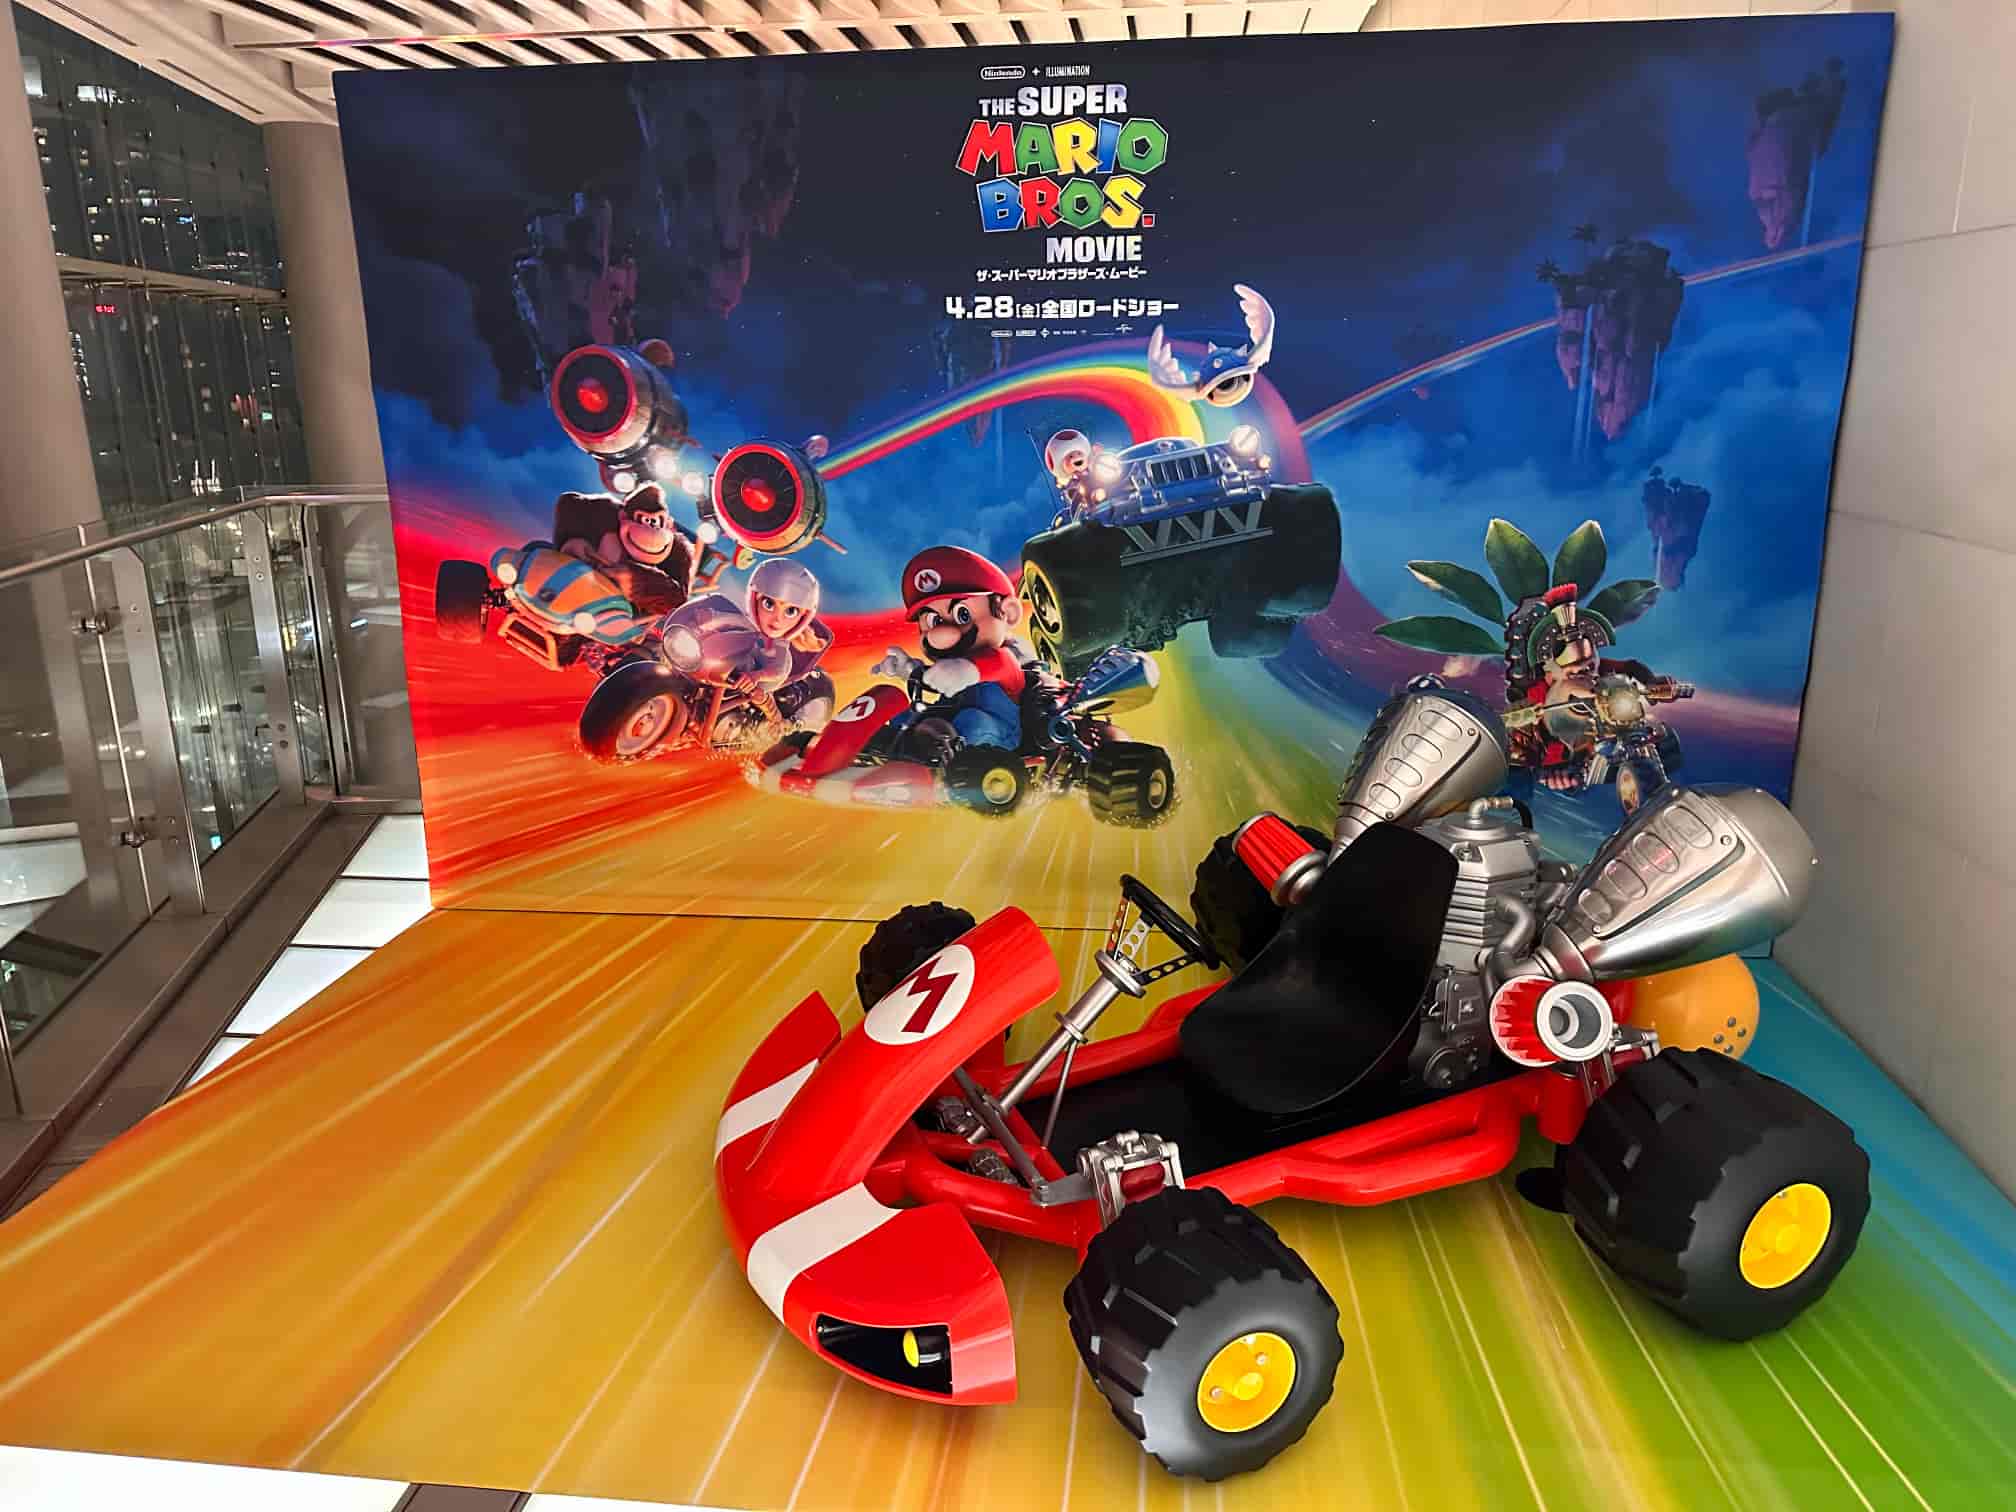 Promotional display for The Super Mario Bros. Movie featuring a life-size model of Mario's red racing kart in front of a vibrant backdrop with characters Mario, Luigi, Princess Peach, and Bowser racing in karts